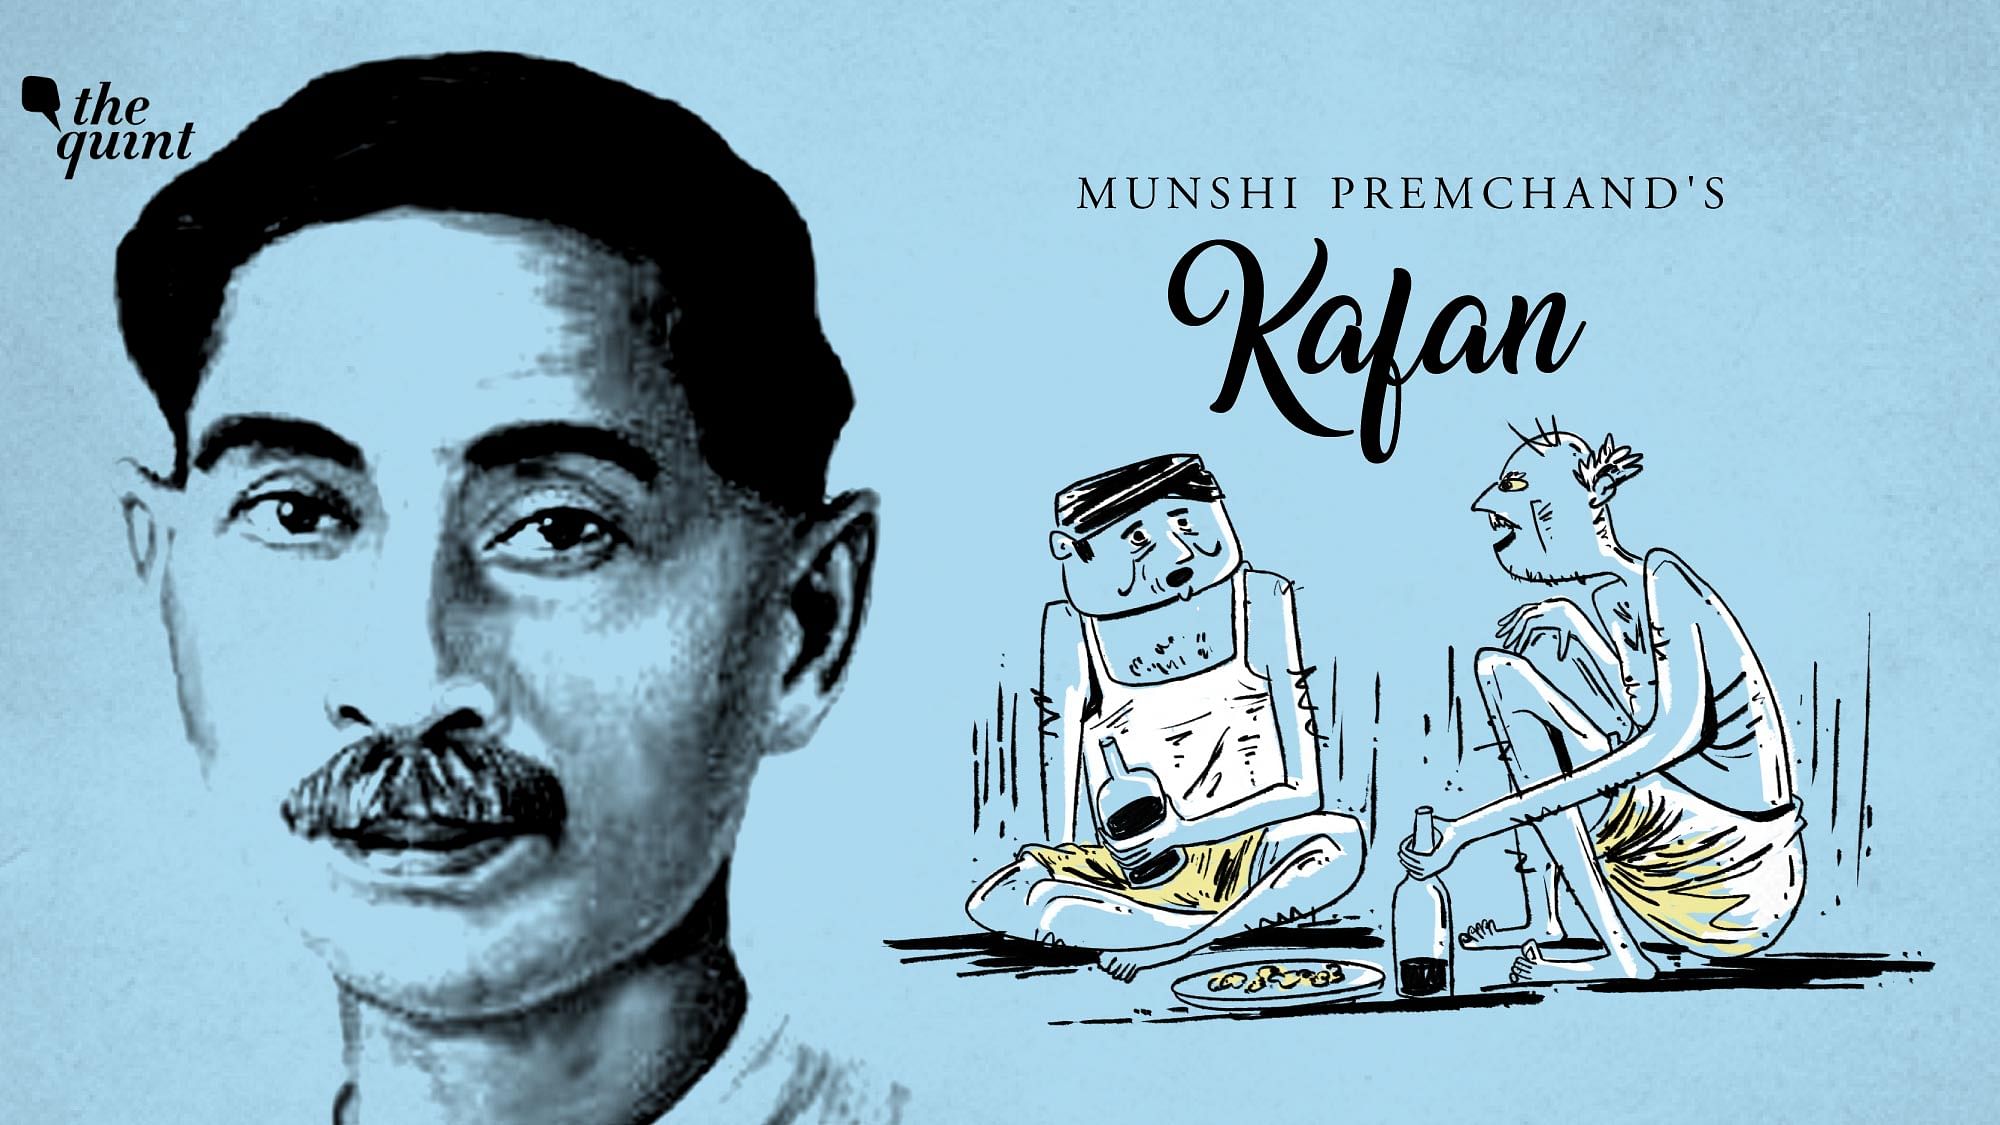 Revered as the ‘Upanyas Samrat’ or the ‘Emperor Among Novelists’, Munshi Premchand also popularised the literary tradition of short story in India.&nbsp;